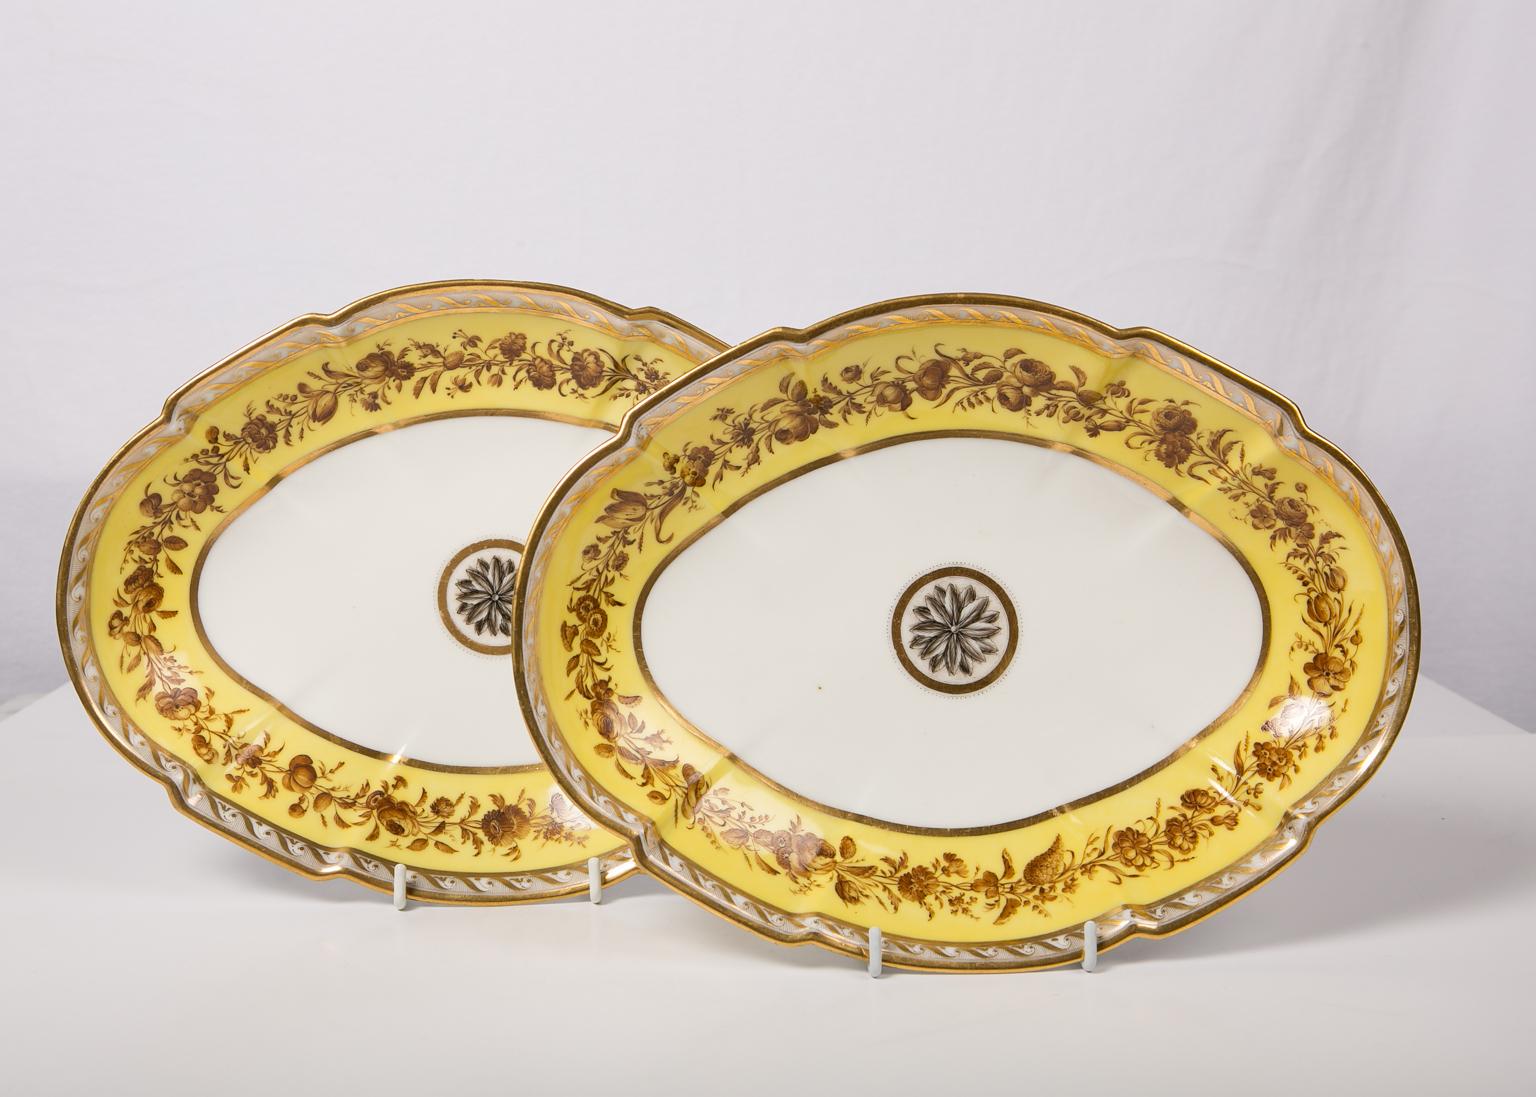 We are pleased to offer this pair of French, 18th century, large oval-shaped serving dishes made by the distinguished factory of Geurhard and Dihl, circa 1790. The decoration on this pair of dishes is the height of French neoclassical design. In the